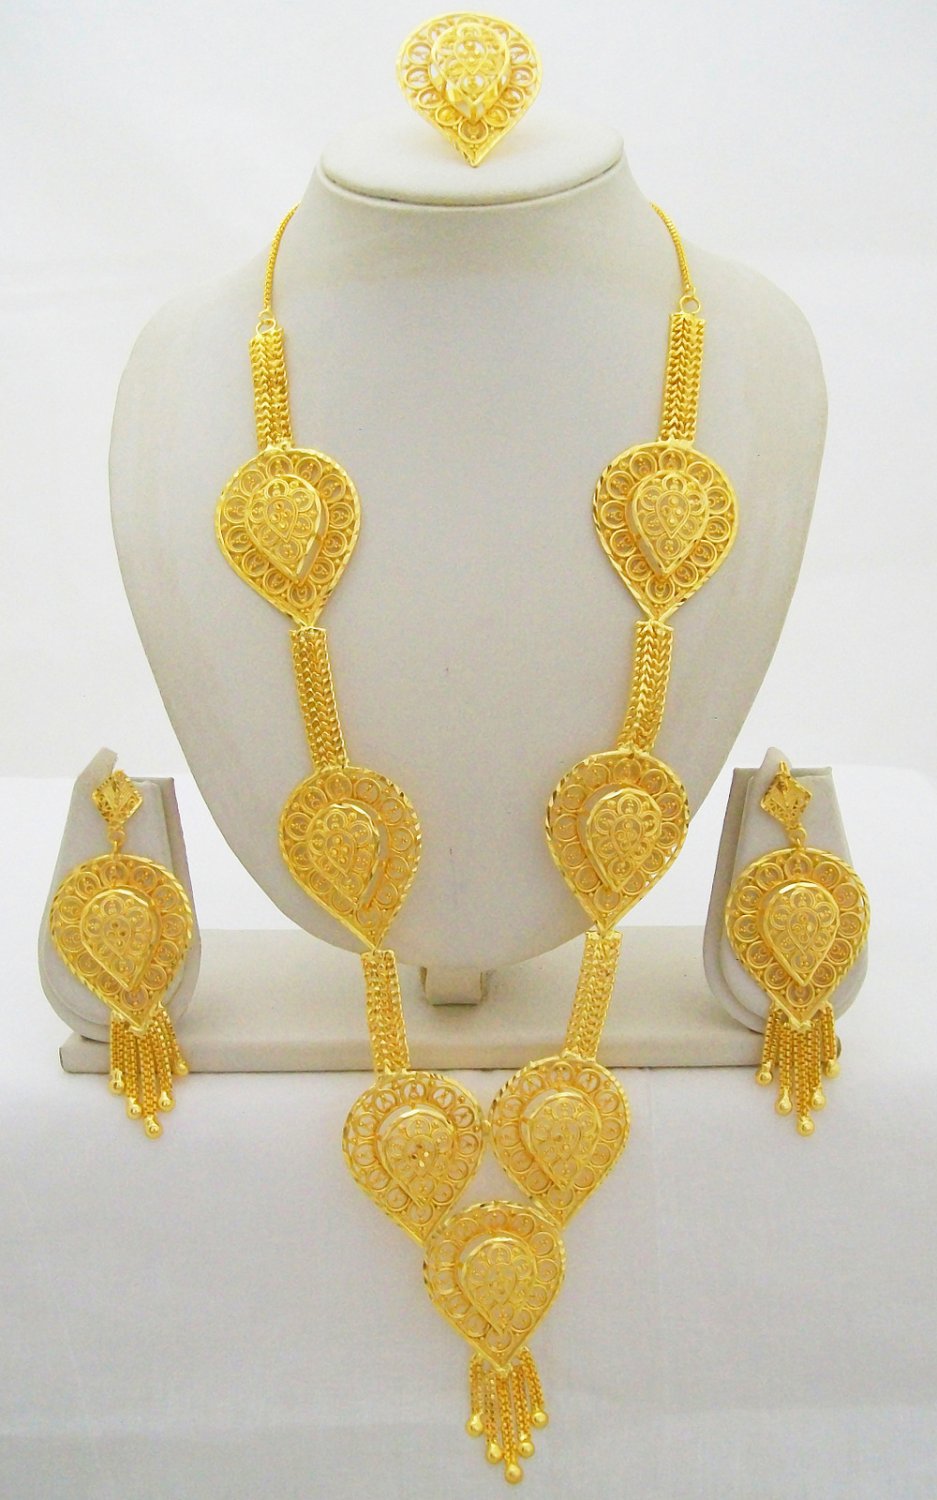 Indian Gold Plated Rani Haar Necklace Long Wedding Bridal Filigree Jewelry Set